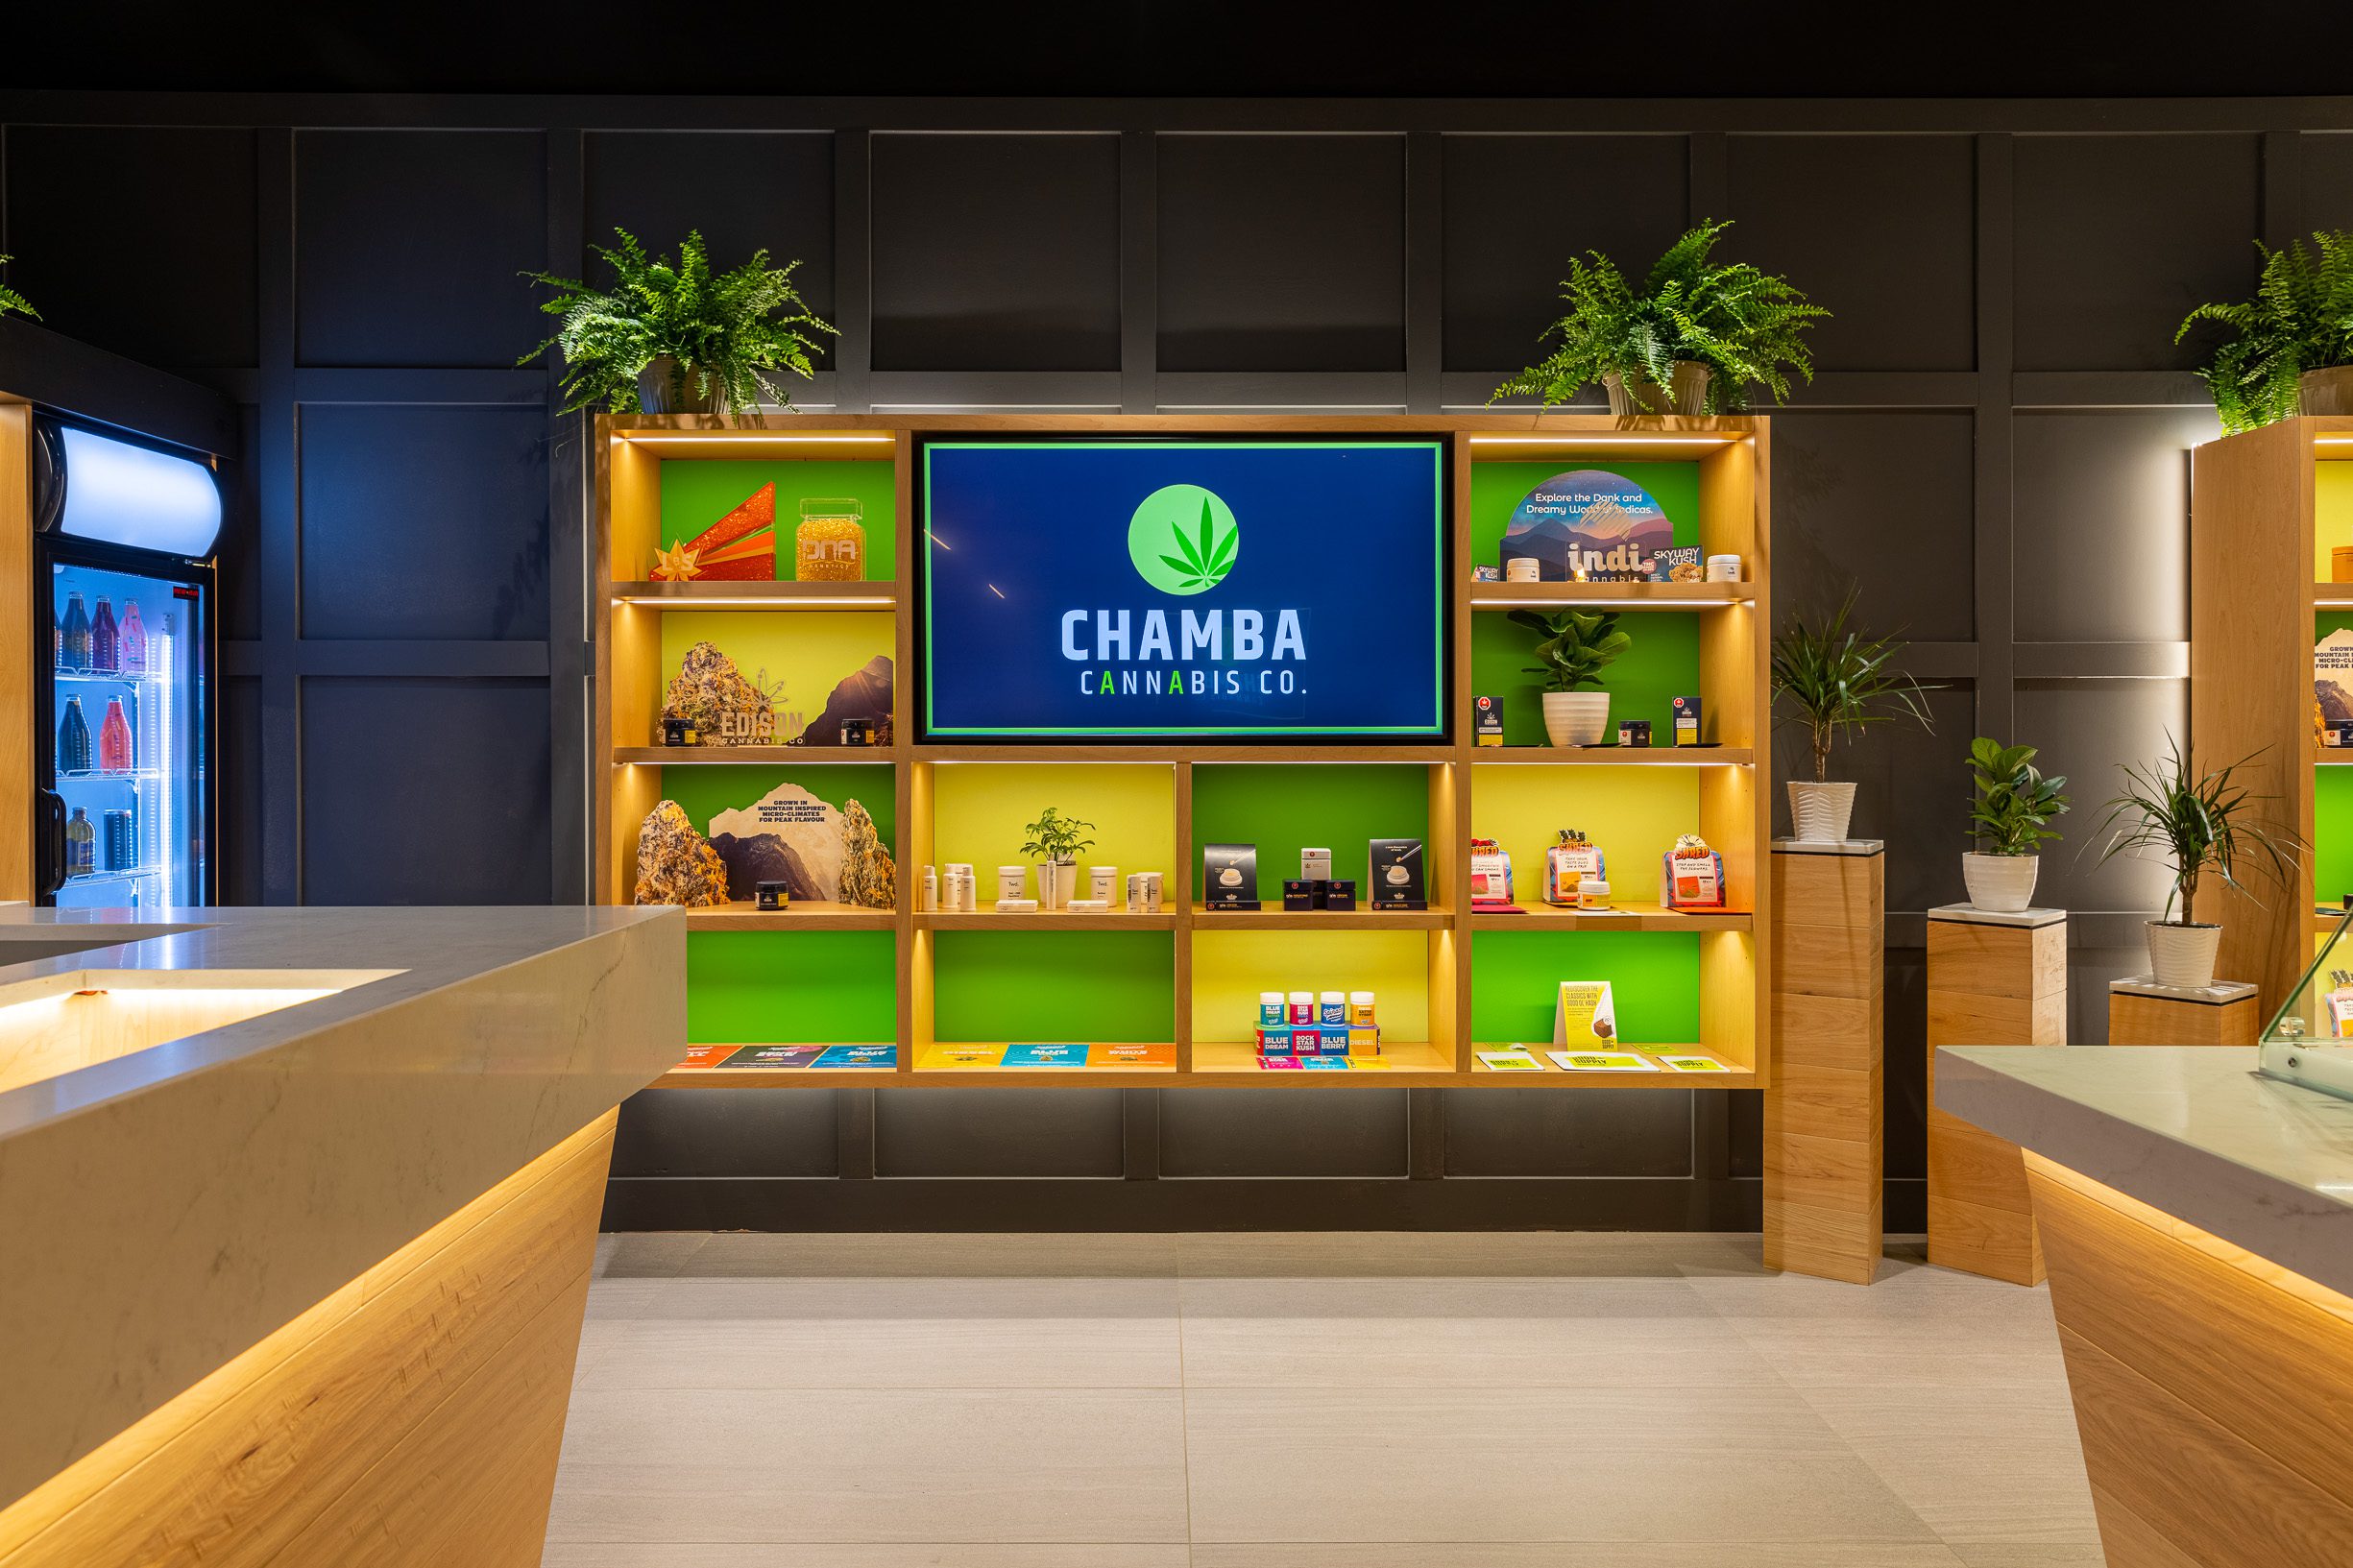 Product display featuring cannabis products, oils, and accessories at Chamba Cannabis Co. Brampton store